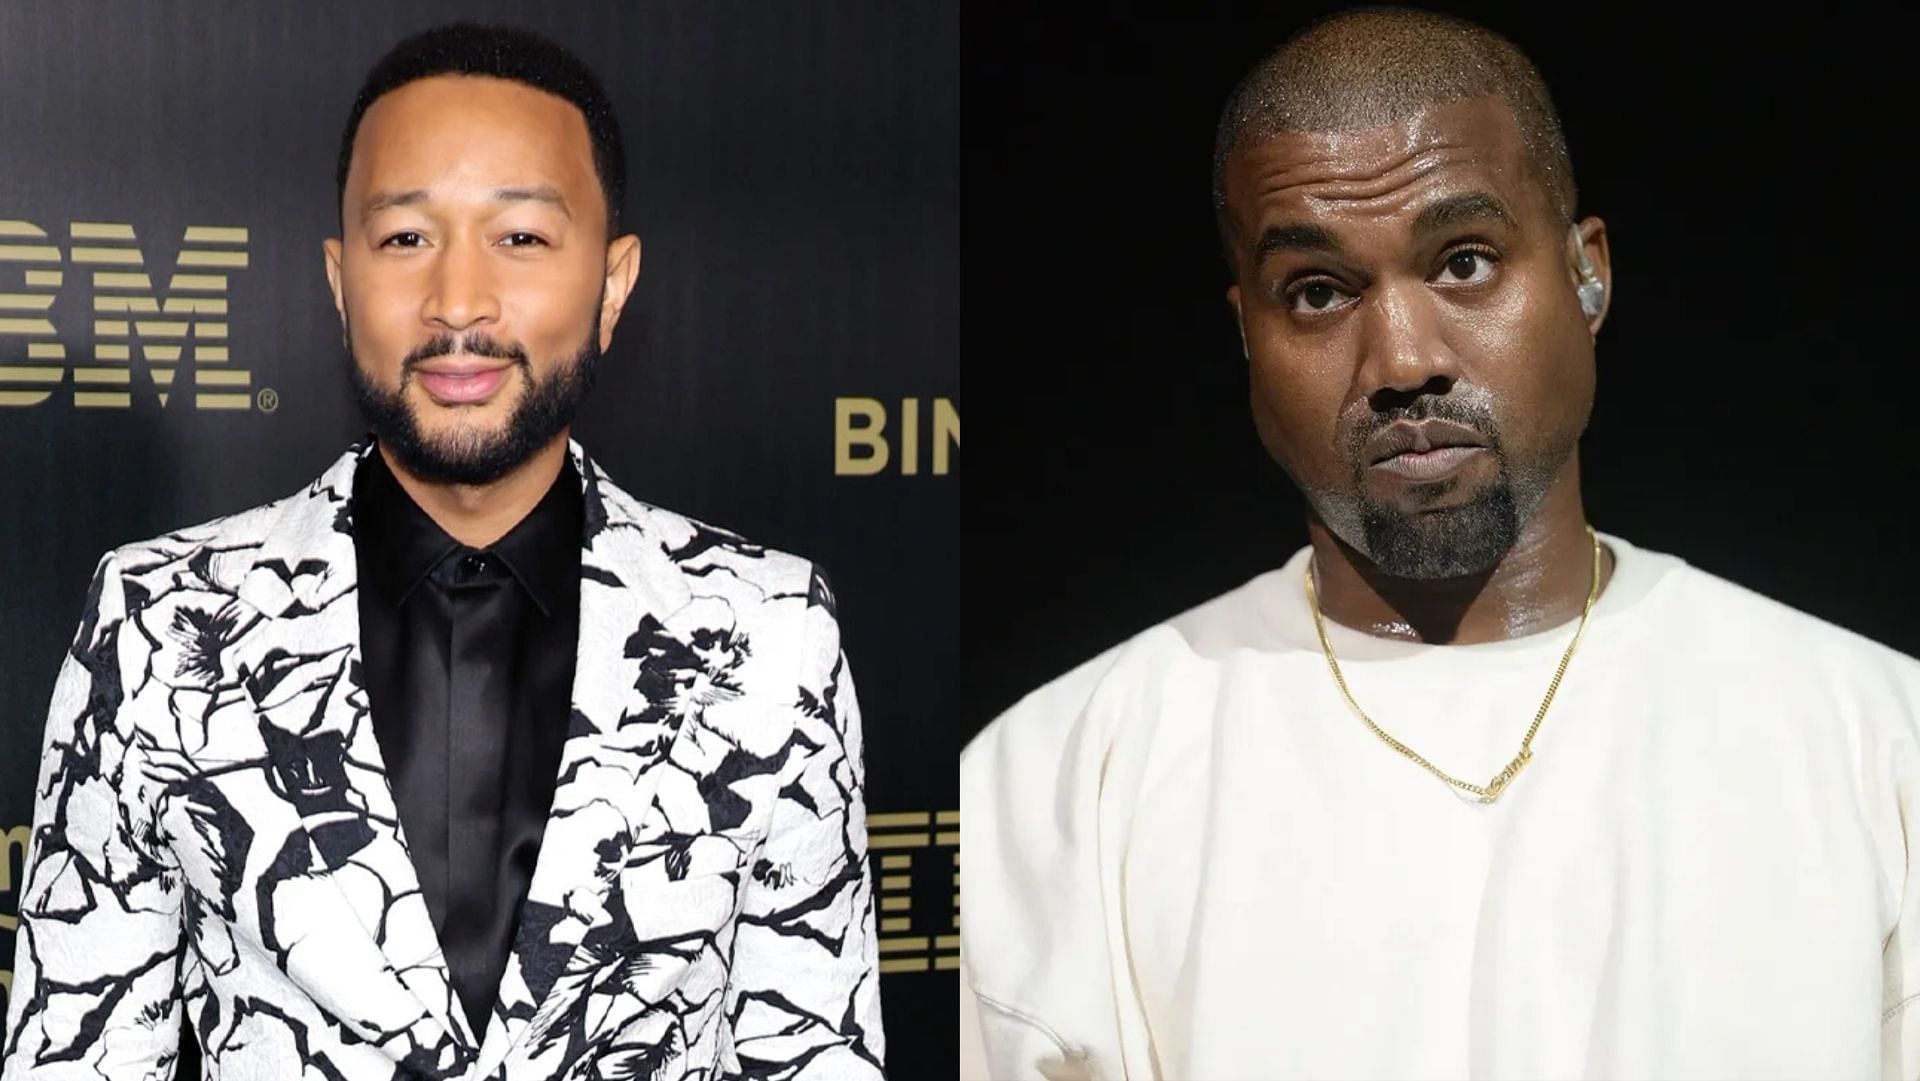 John Legend and Kanye West had a fallout because of differing political views. (Image via Amy Sussman/Getty, Scott Dudelson/Getty)